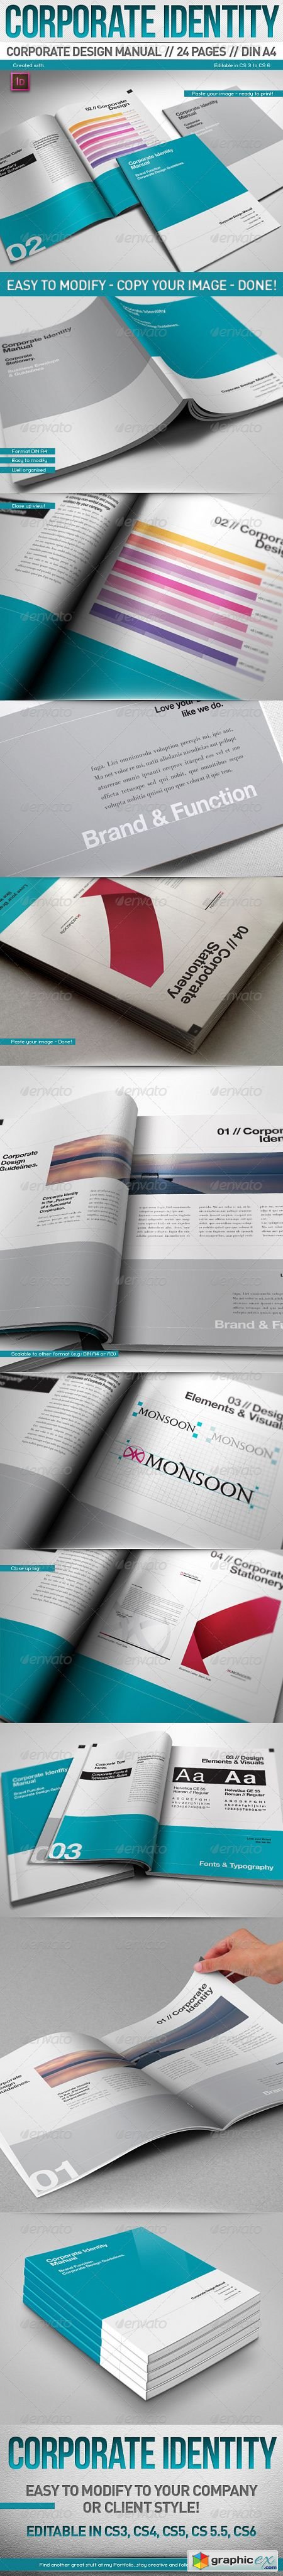 Corporate Design Manual Guide DIN A4 // 24 Pages